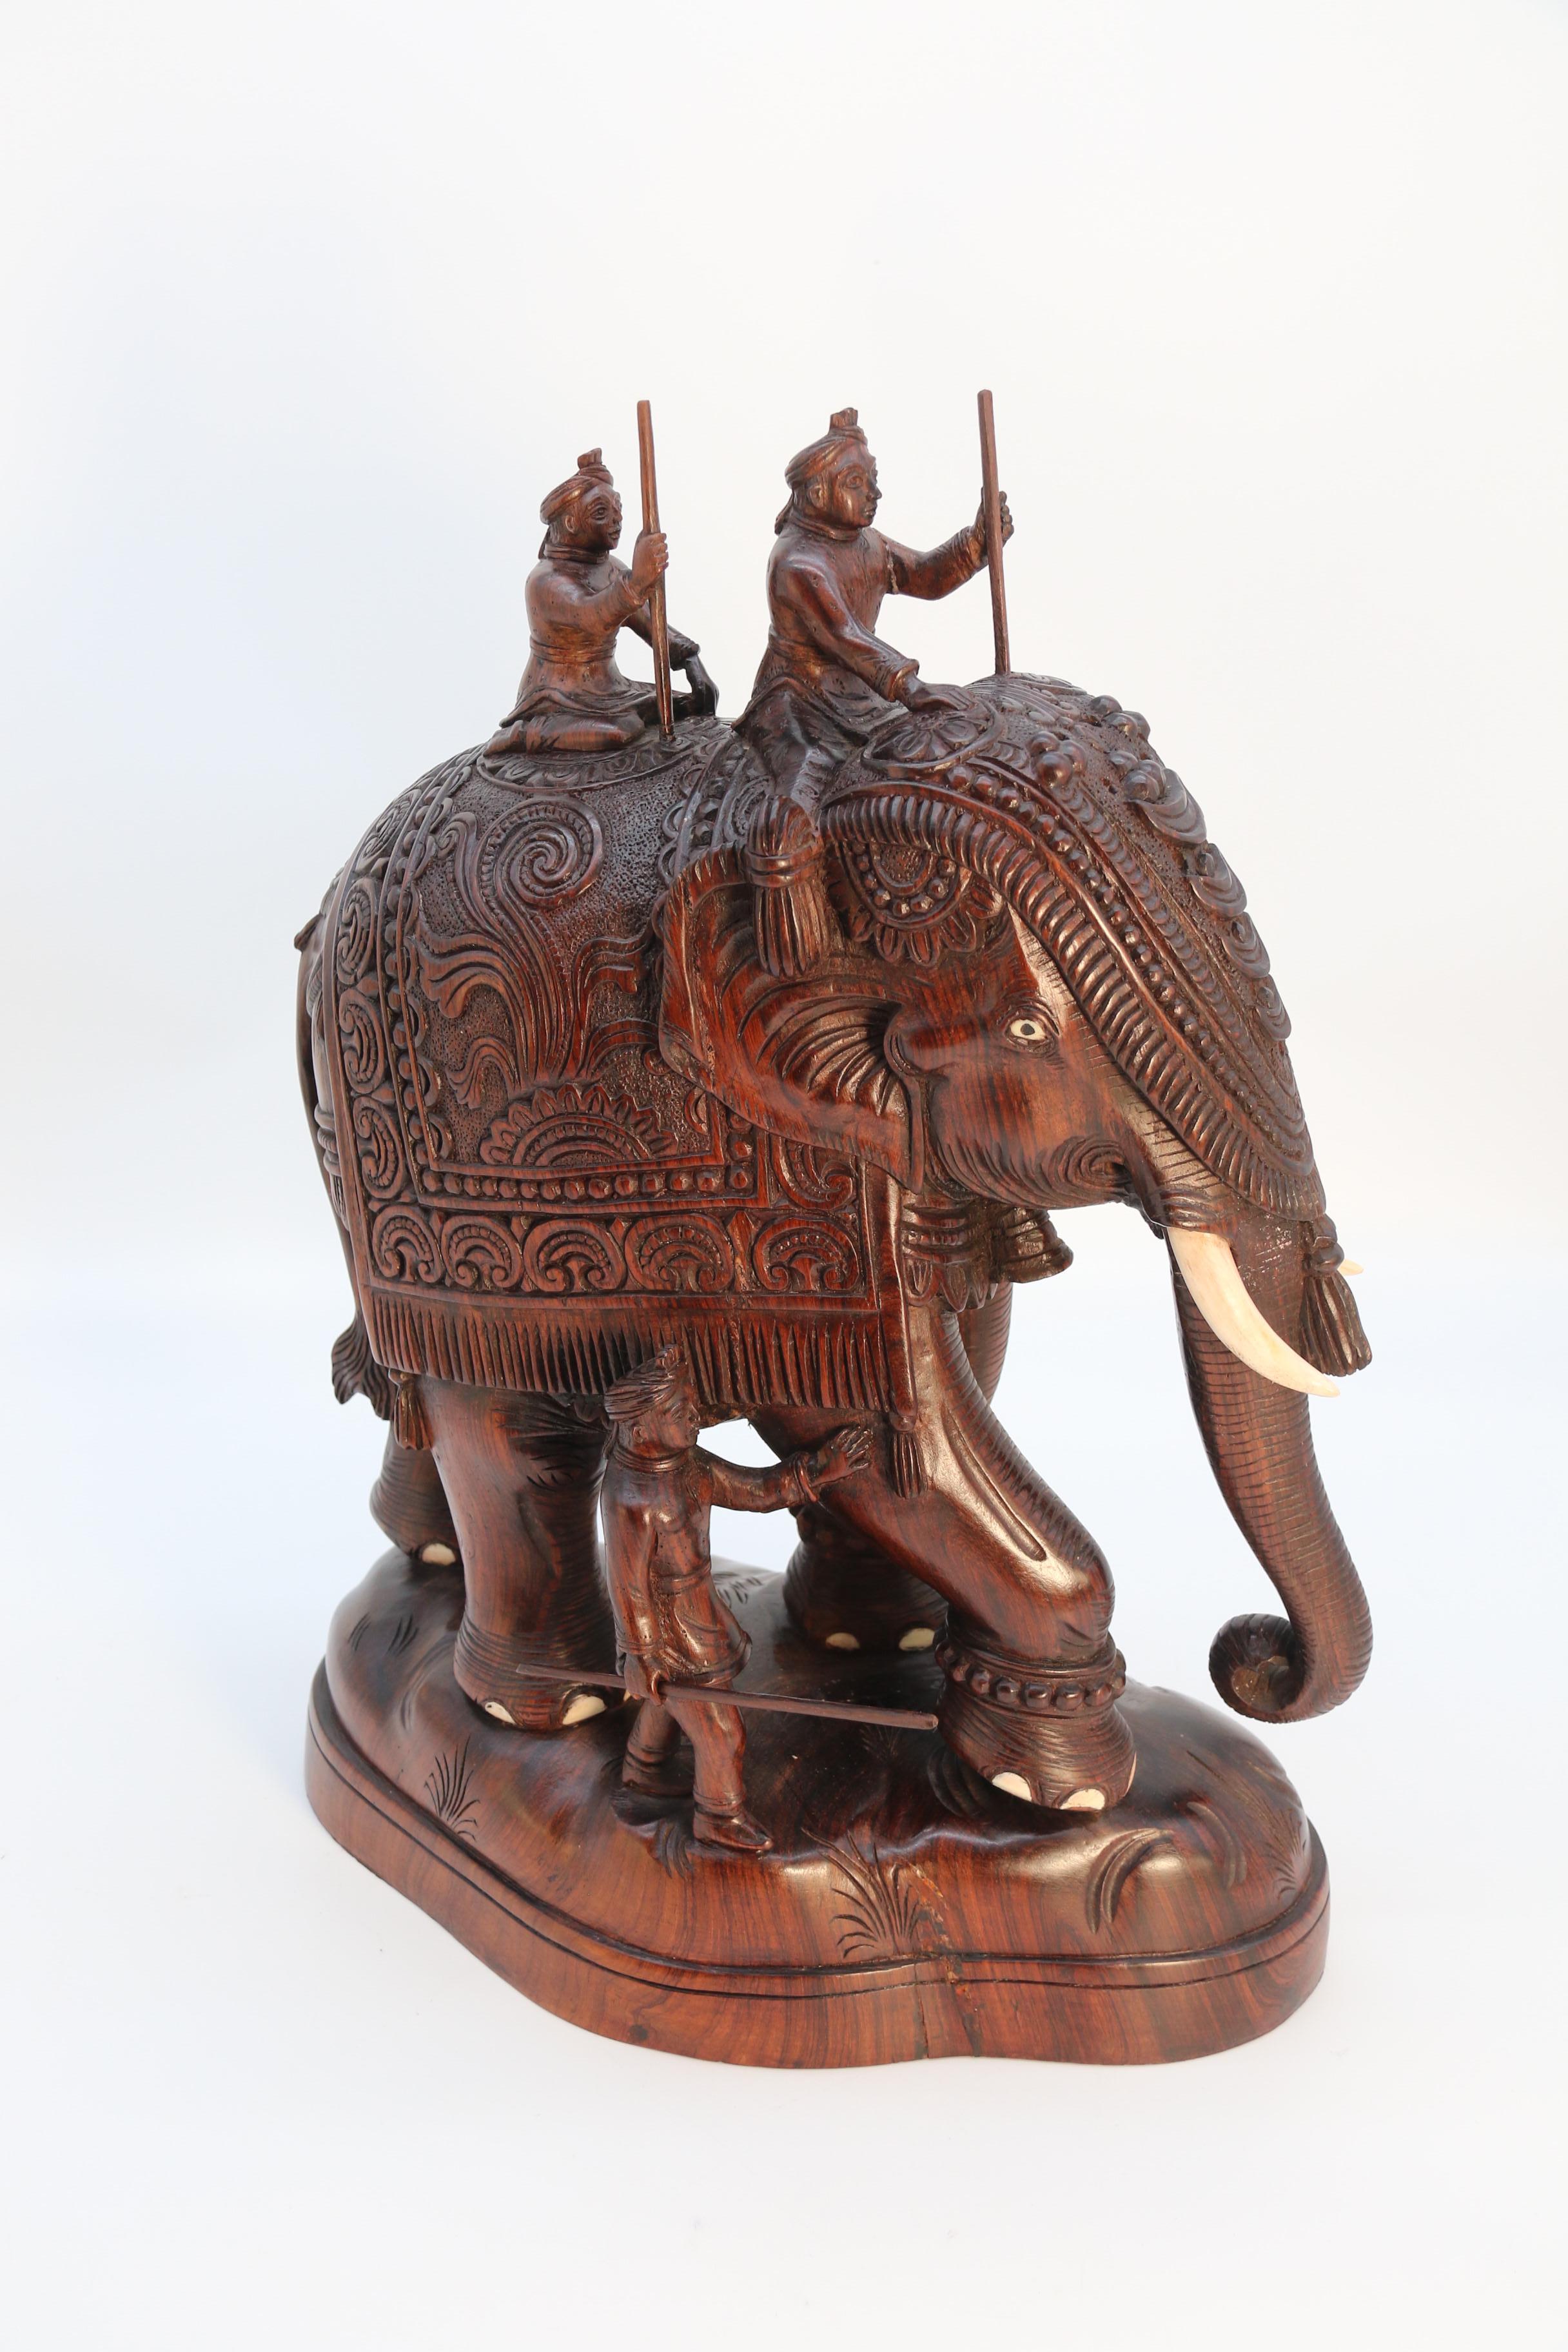 This superb Indian work of art is finely hand carved from a single large piece of rich dense well figured hardwood and it is remarkable in its detail. It portrays a very large Indian elephant finally dressed in elaborate ceremonial robes and bridle.